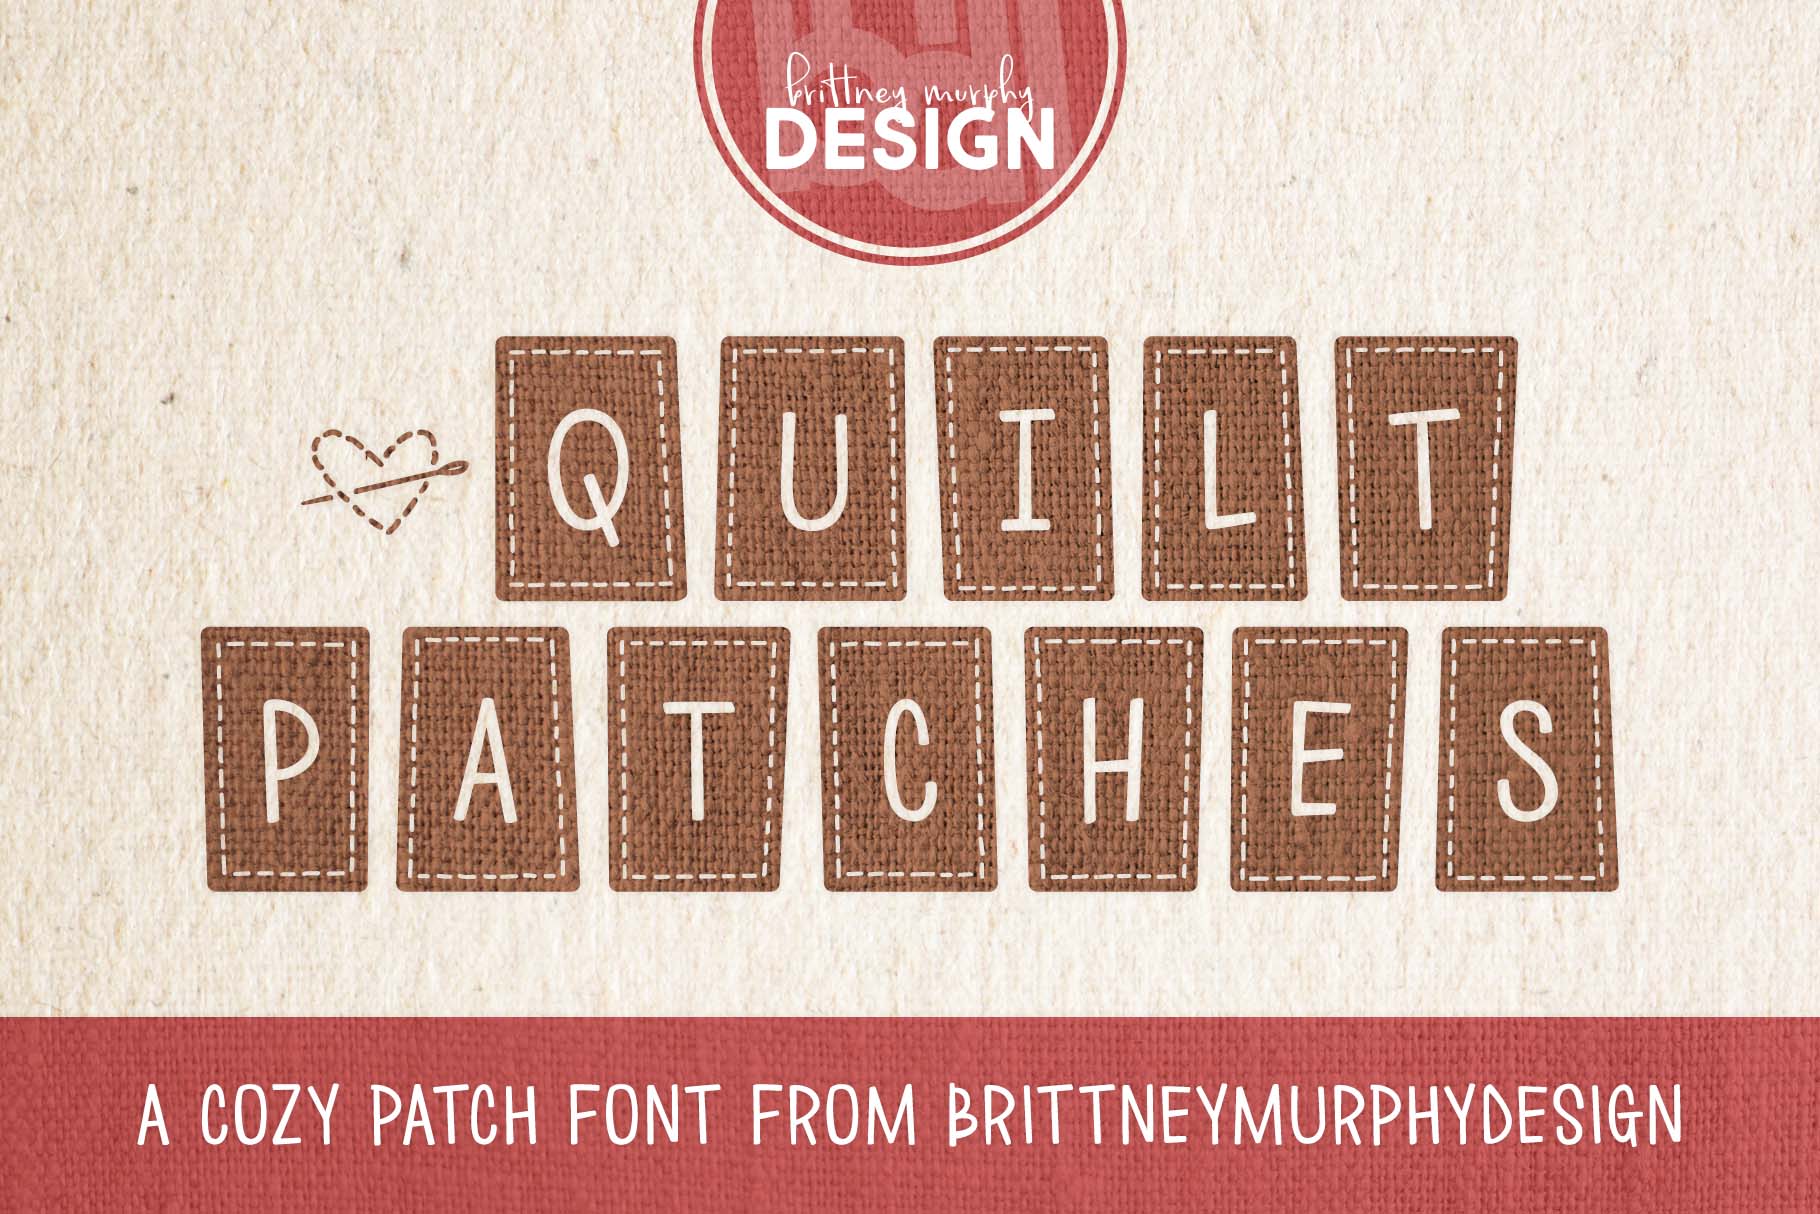 Quilt*Patches